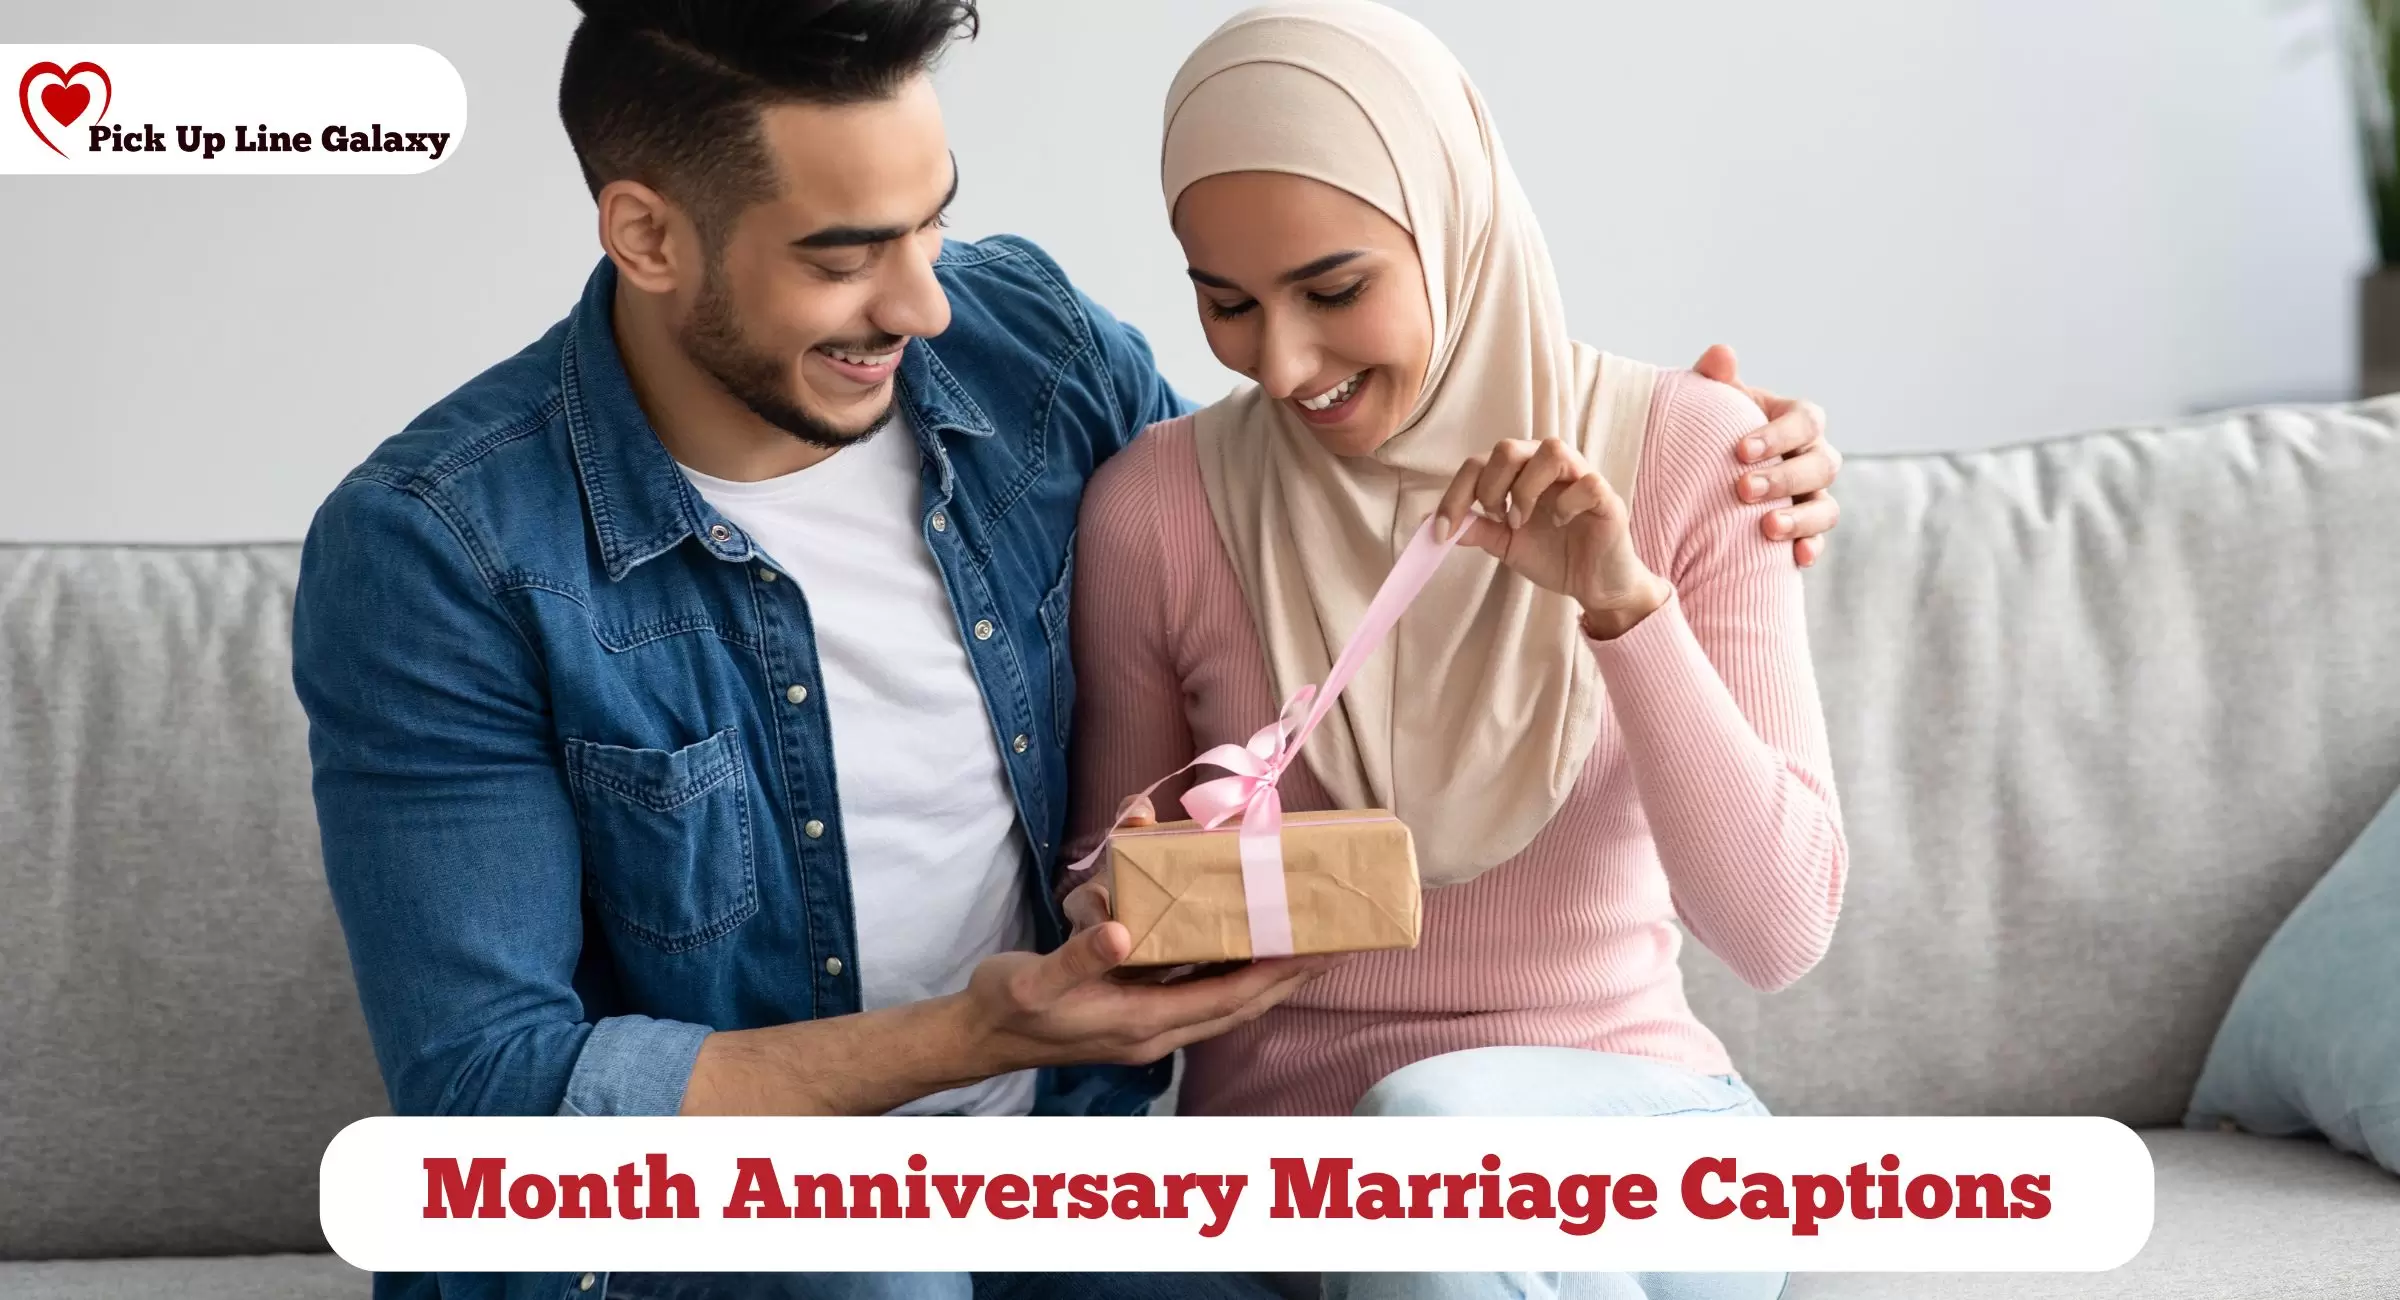 Month Anniversary Marriage Captions